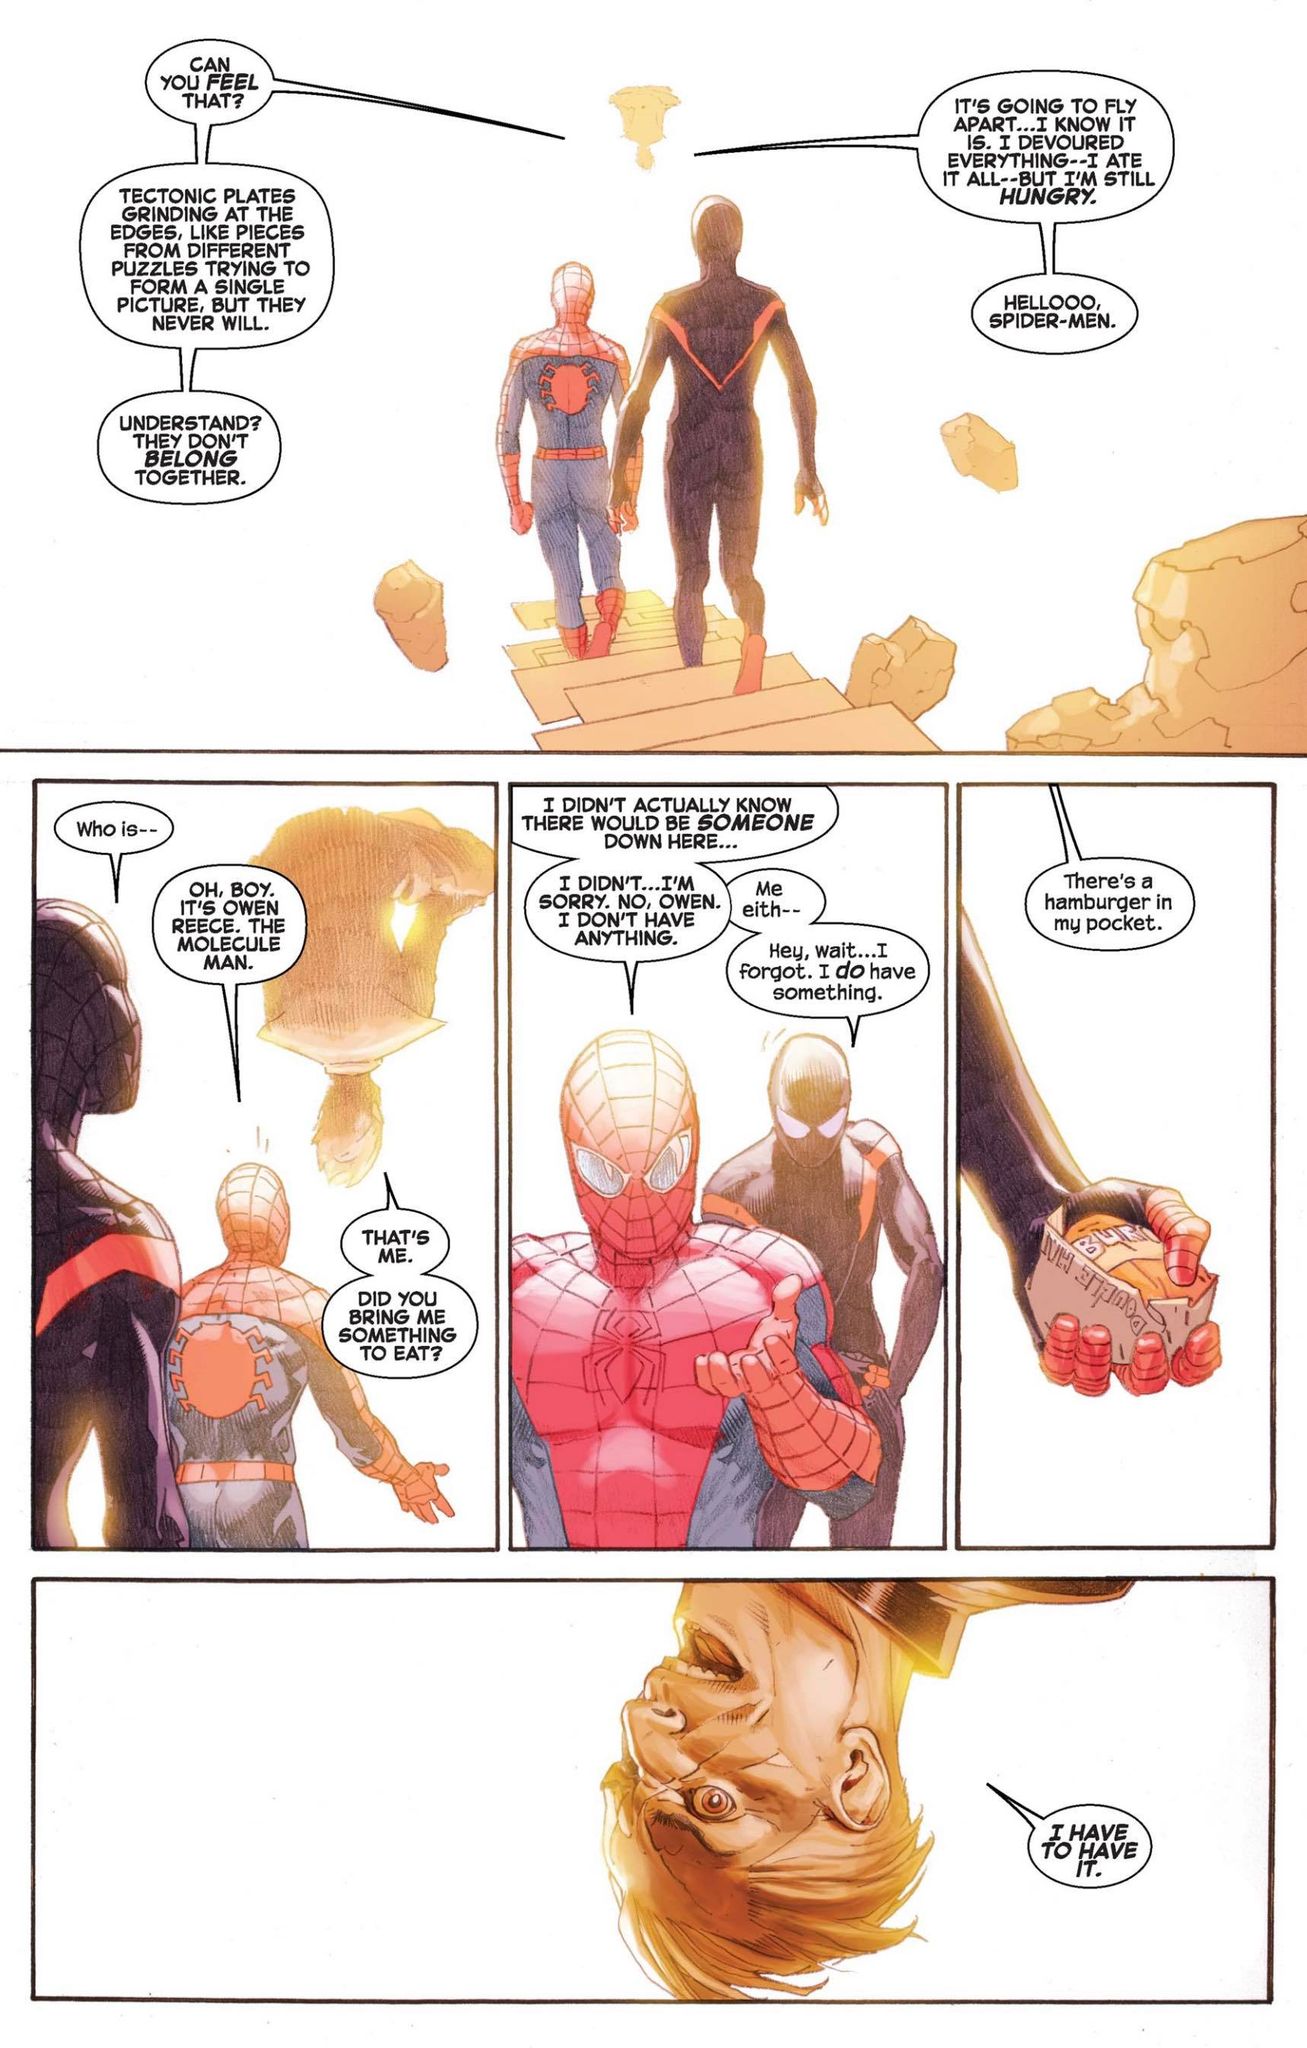 Miles Morales saves the day with a cheeseburger (Secret Wars #6)